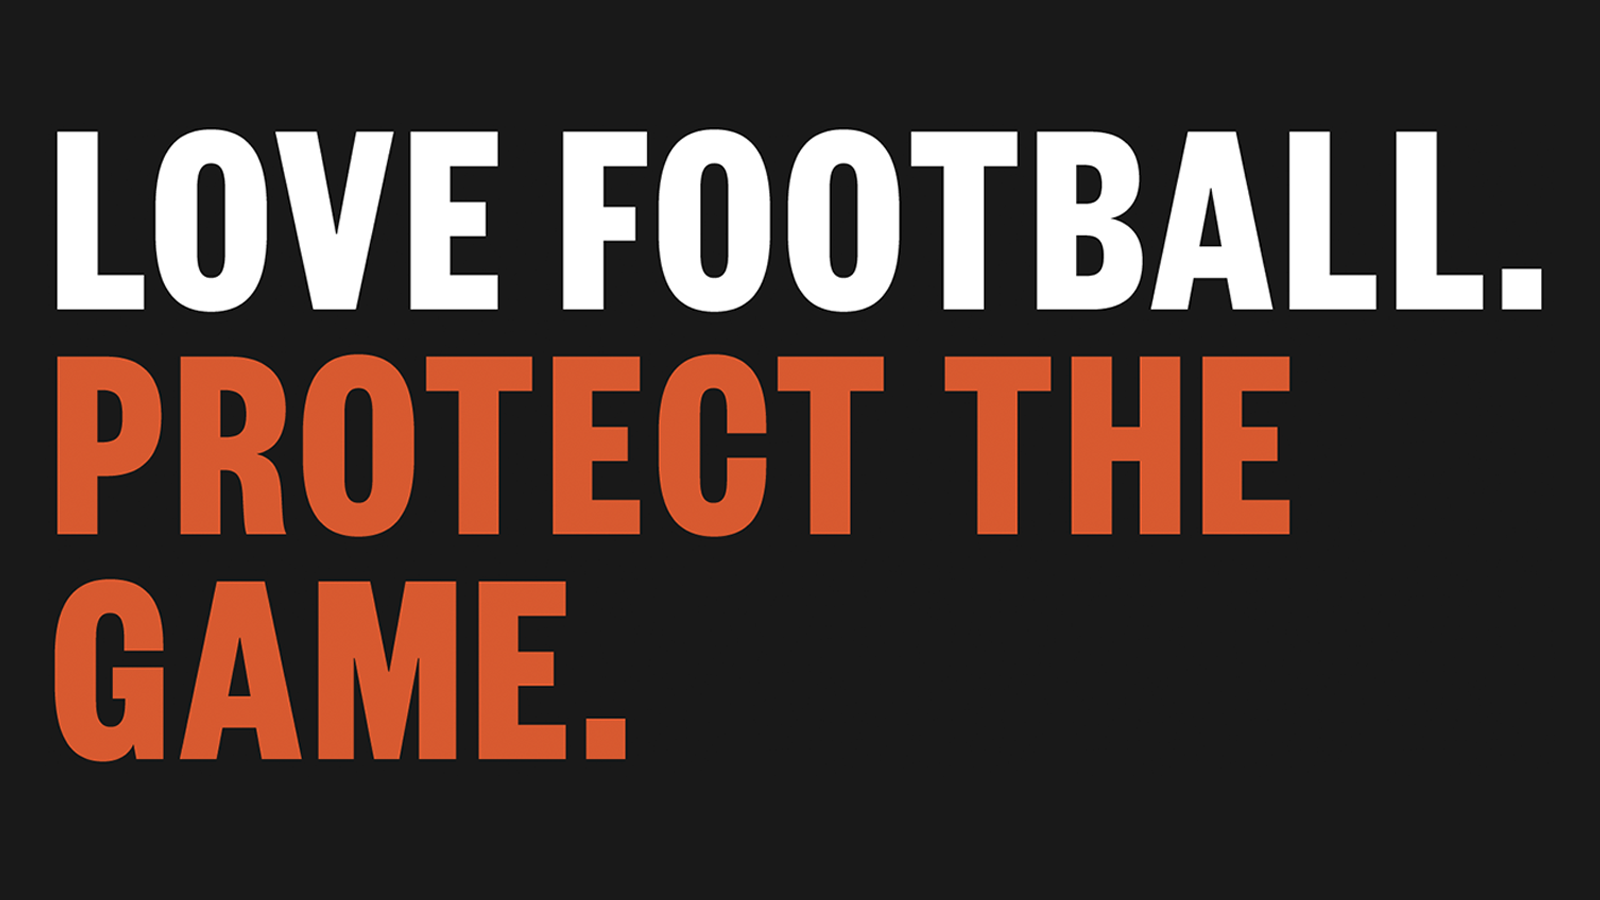 Love football. Protect the game.